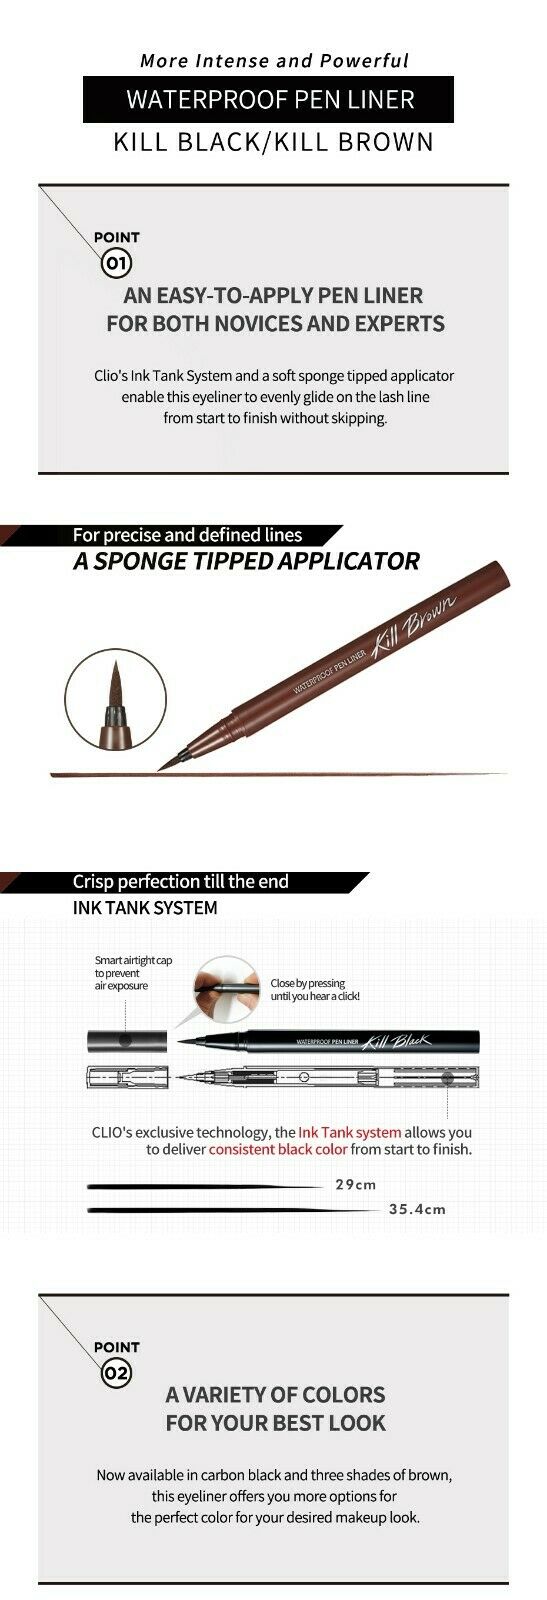 An easy to apply pen liner for both novices and experts, A sponge tipped applicator, Ink tank system, Crisp perfection till the end, Consistent black color